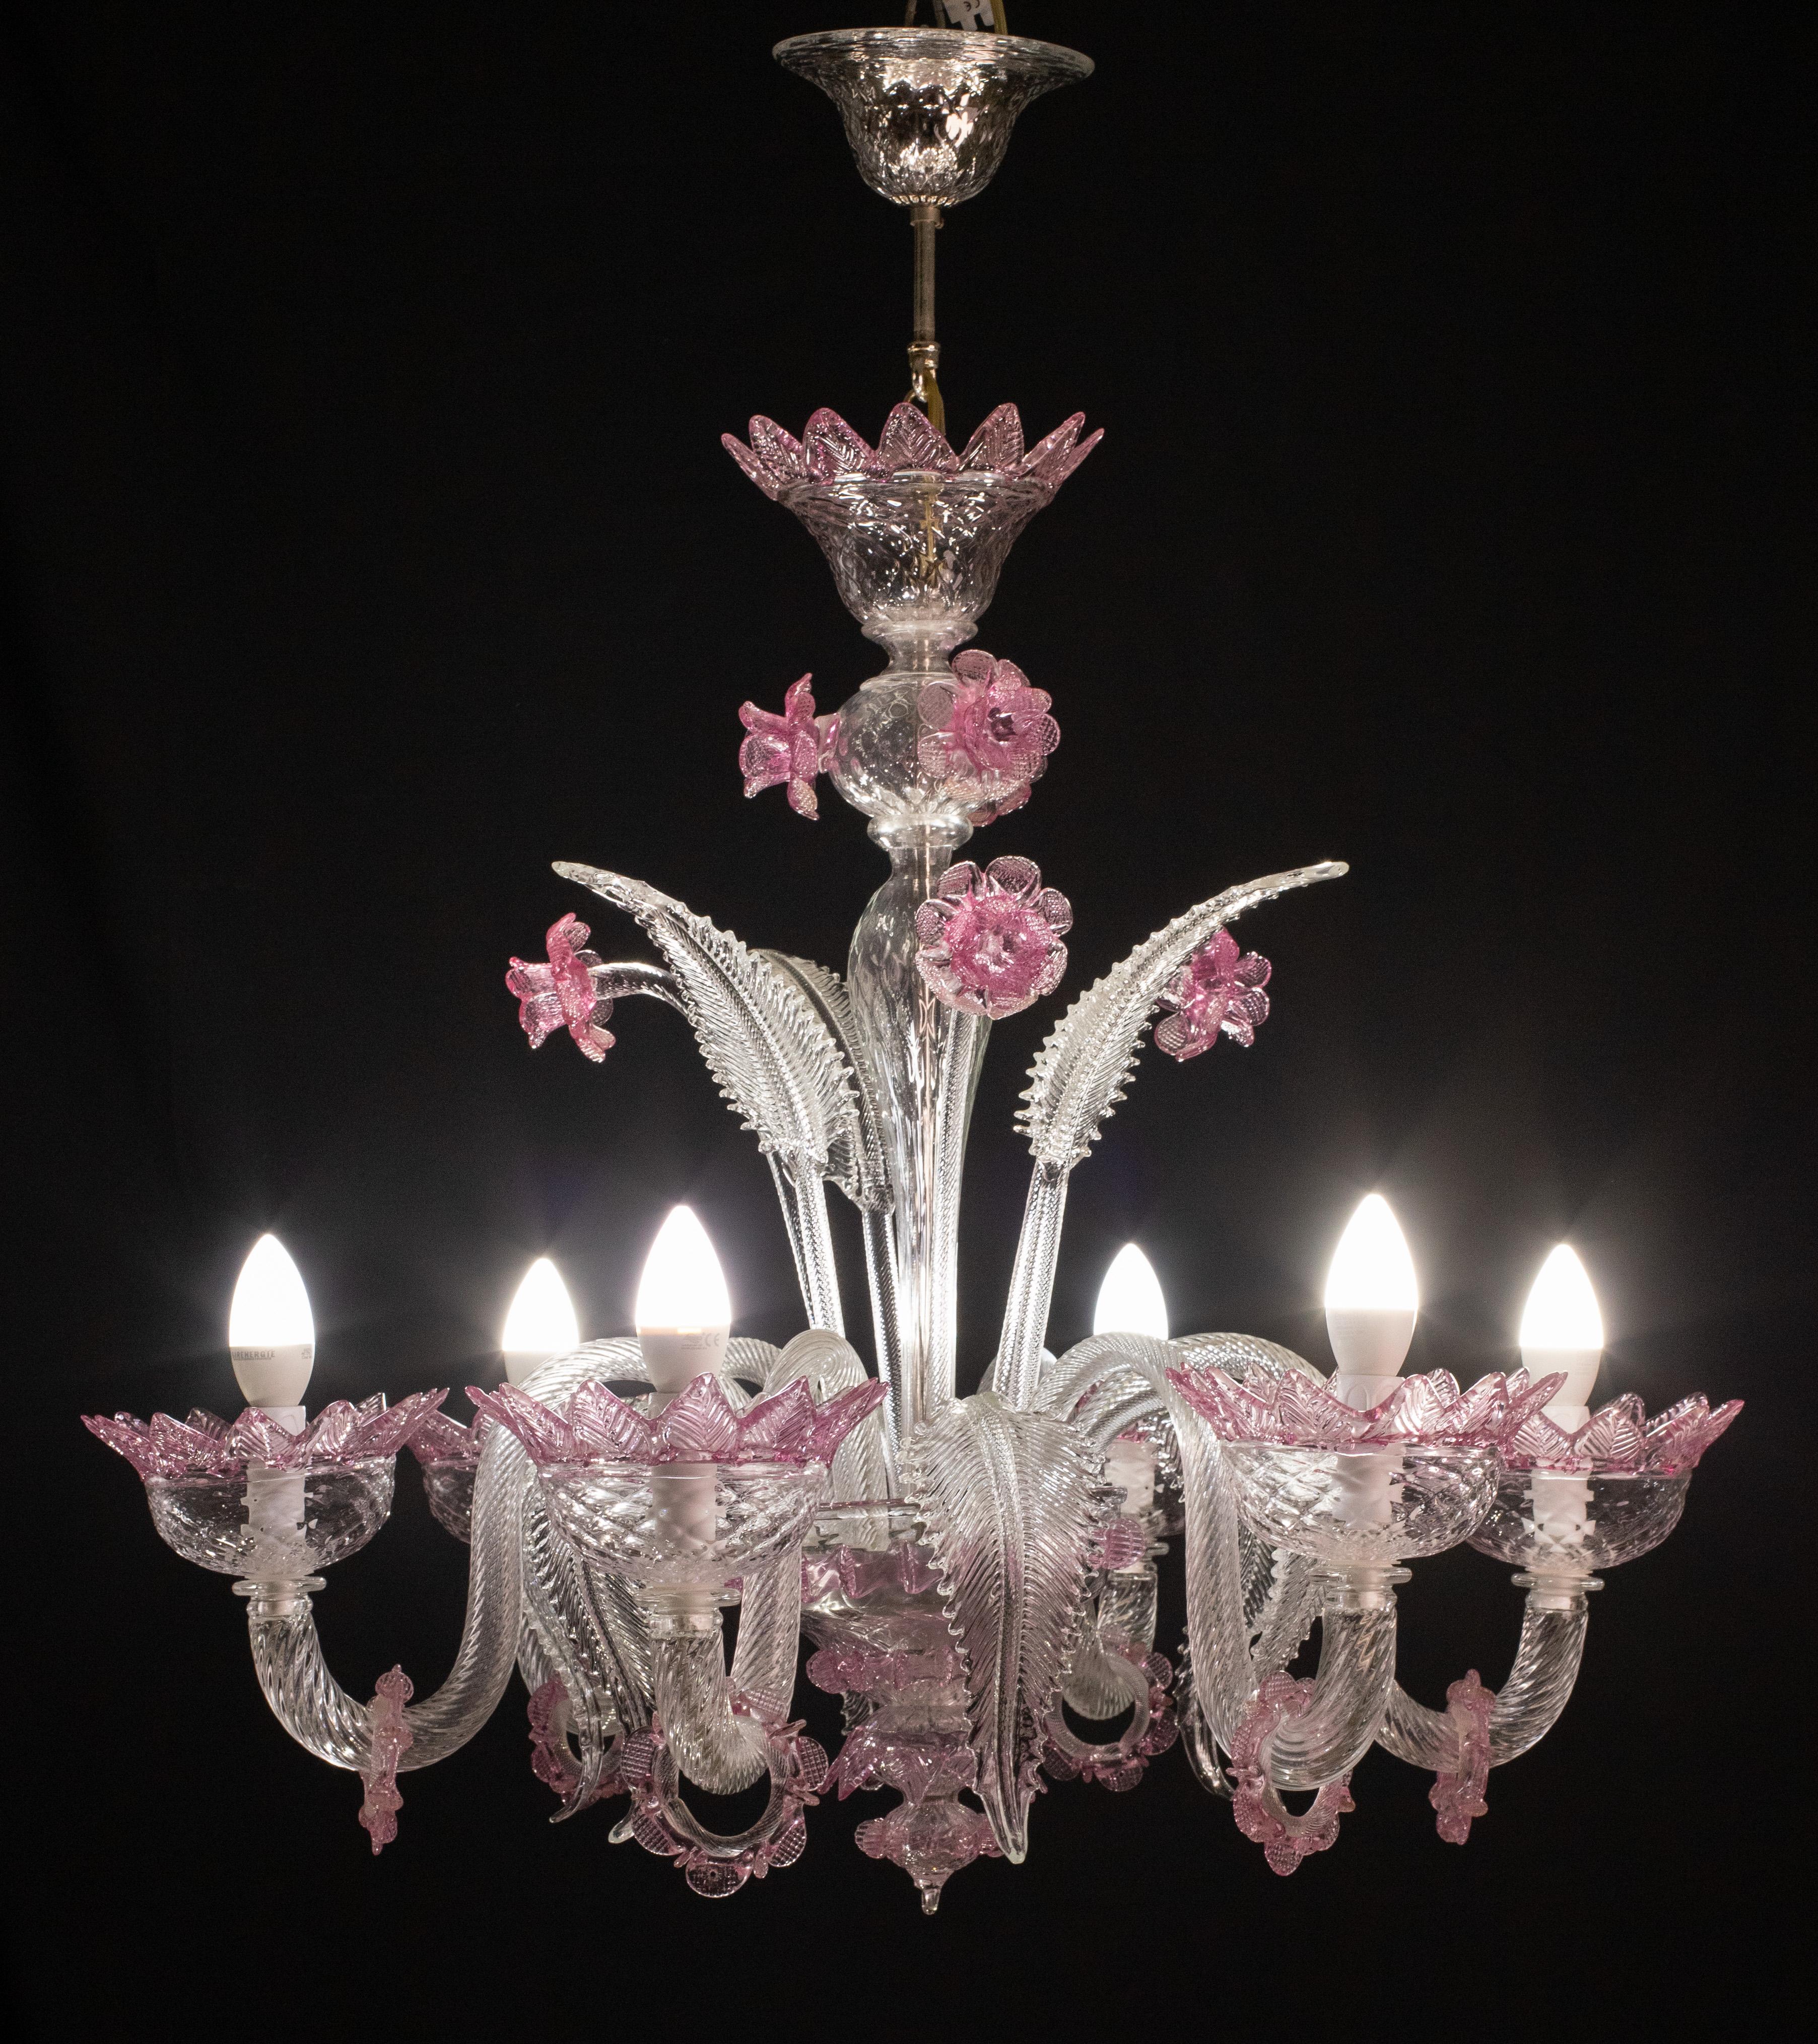 Wonderful Murano chandelier, typical classic Venetian.

The chandelier has 6 arms that mount 6 e14 light points, European standards, possible to rewire for Usa.

The fixture is full of leaves and flowers, 6 high leaves\flowers, 6 low leaves.

The